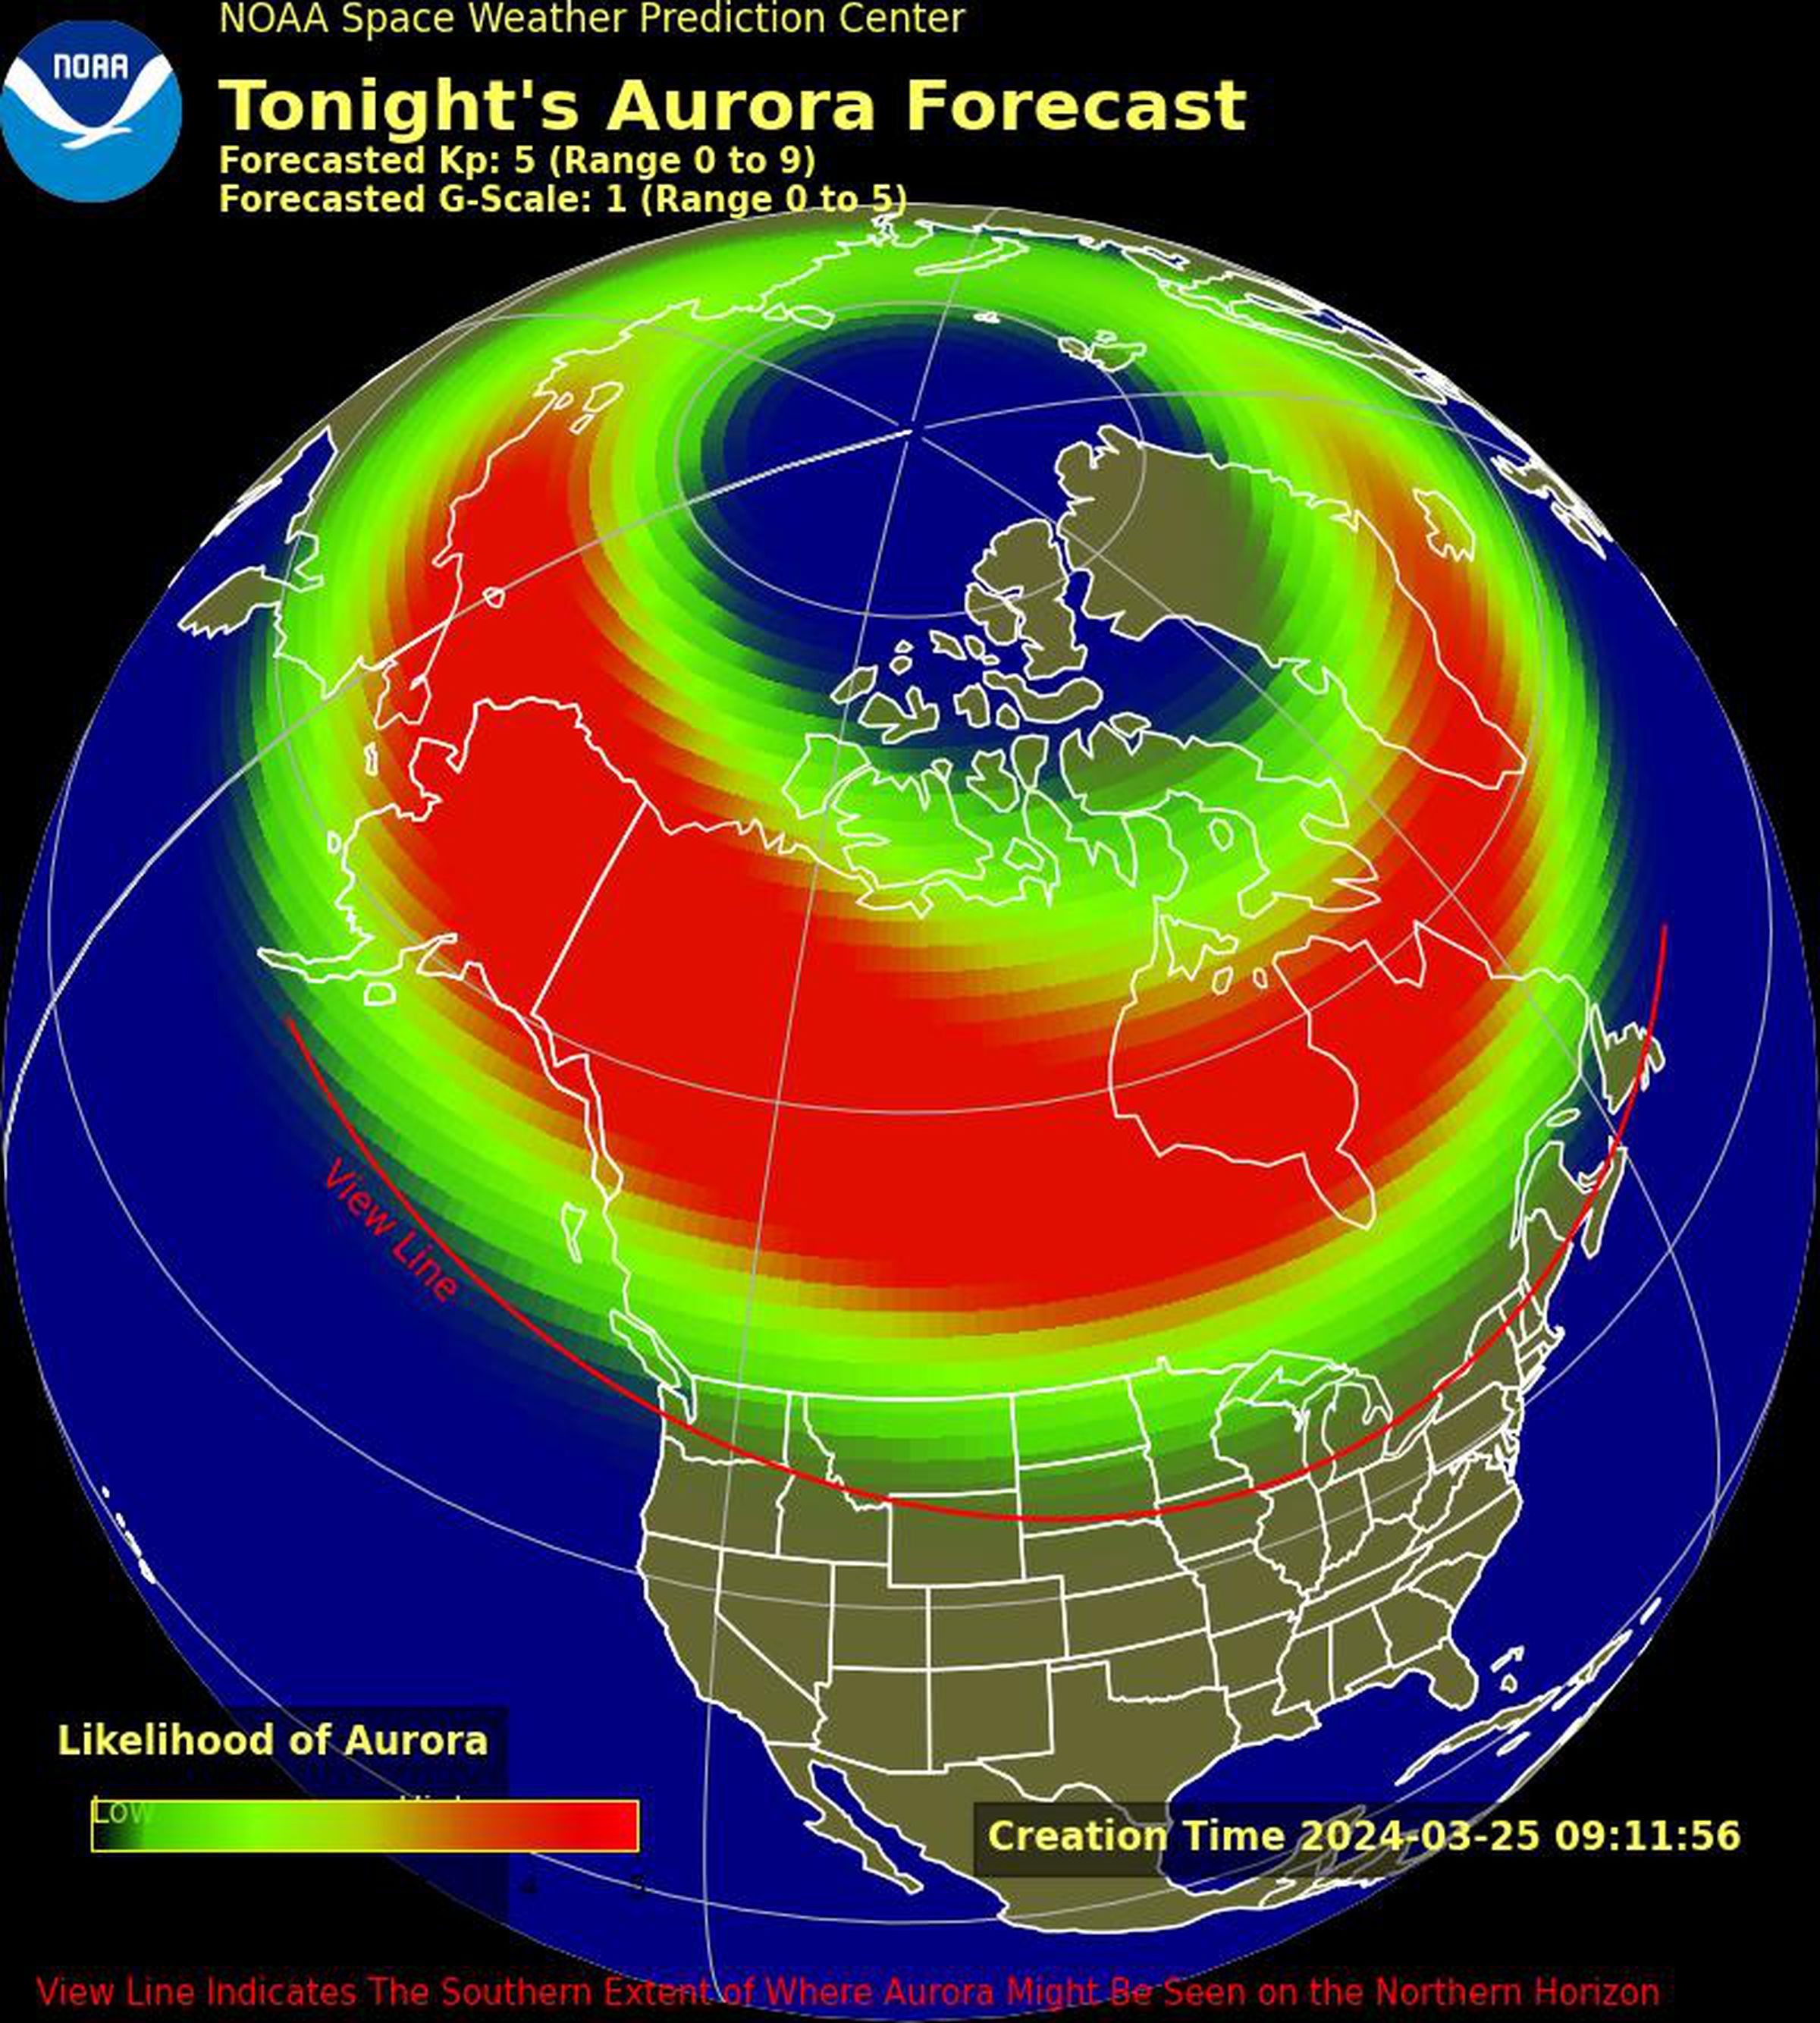 Forcast map of potential Northern Lights viewings provided by the Space Weather Prediction Center